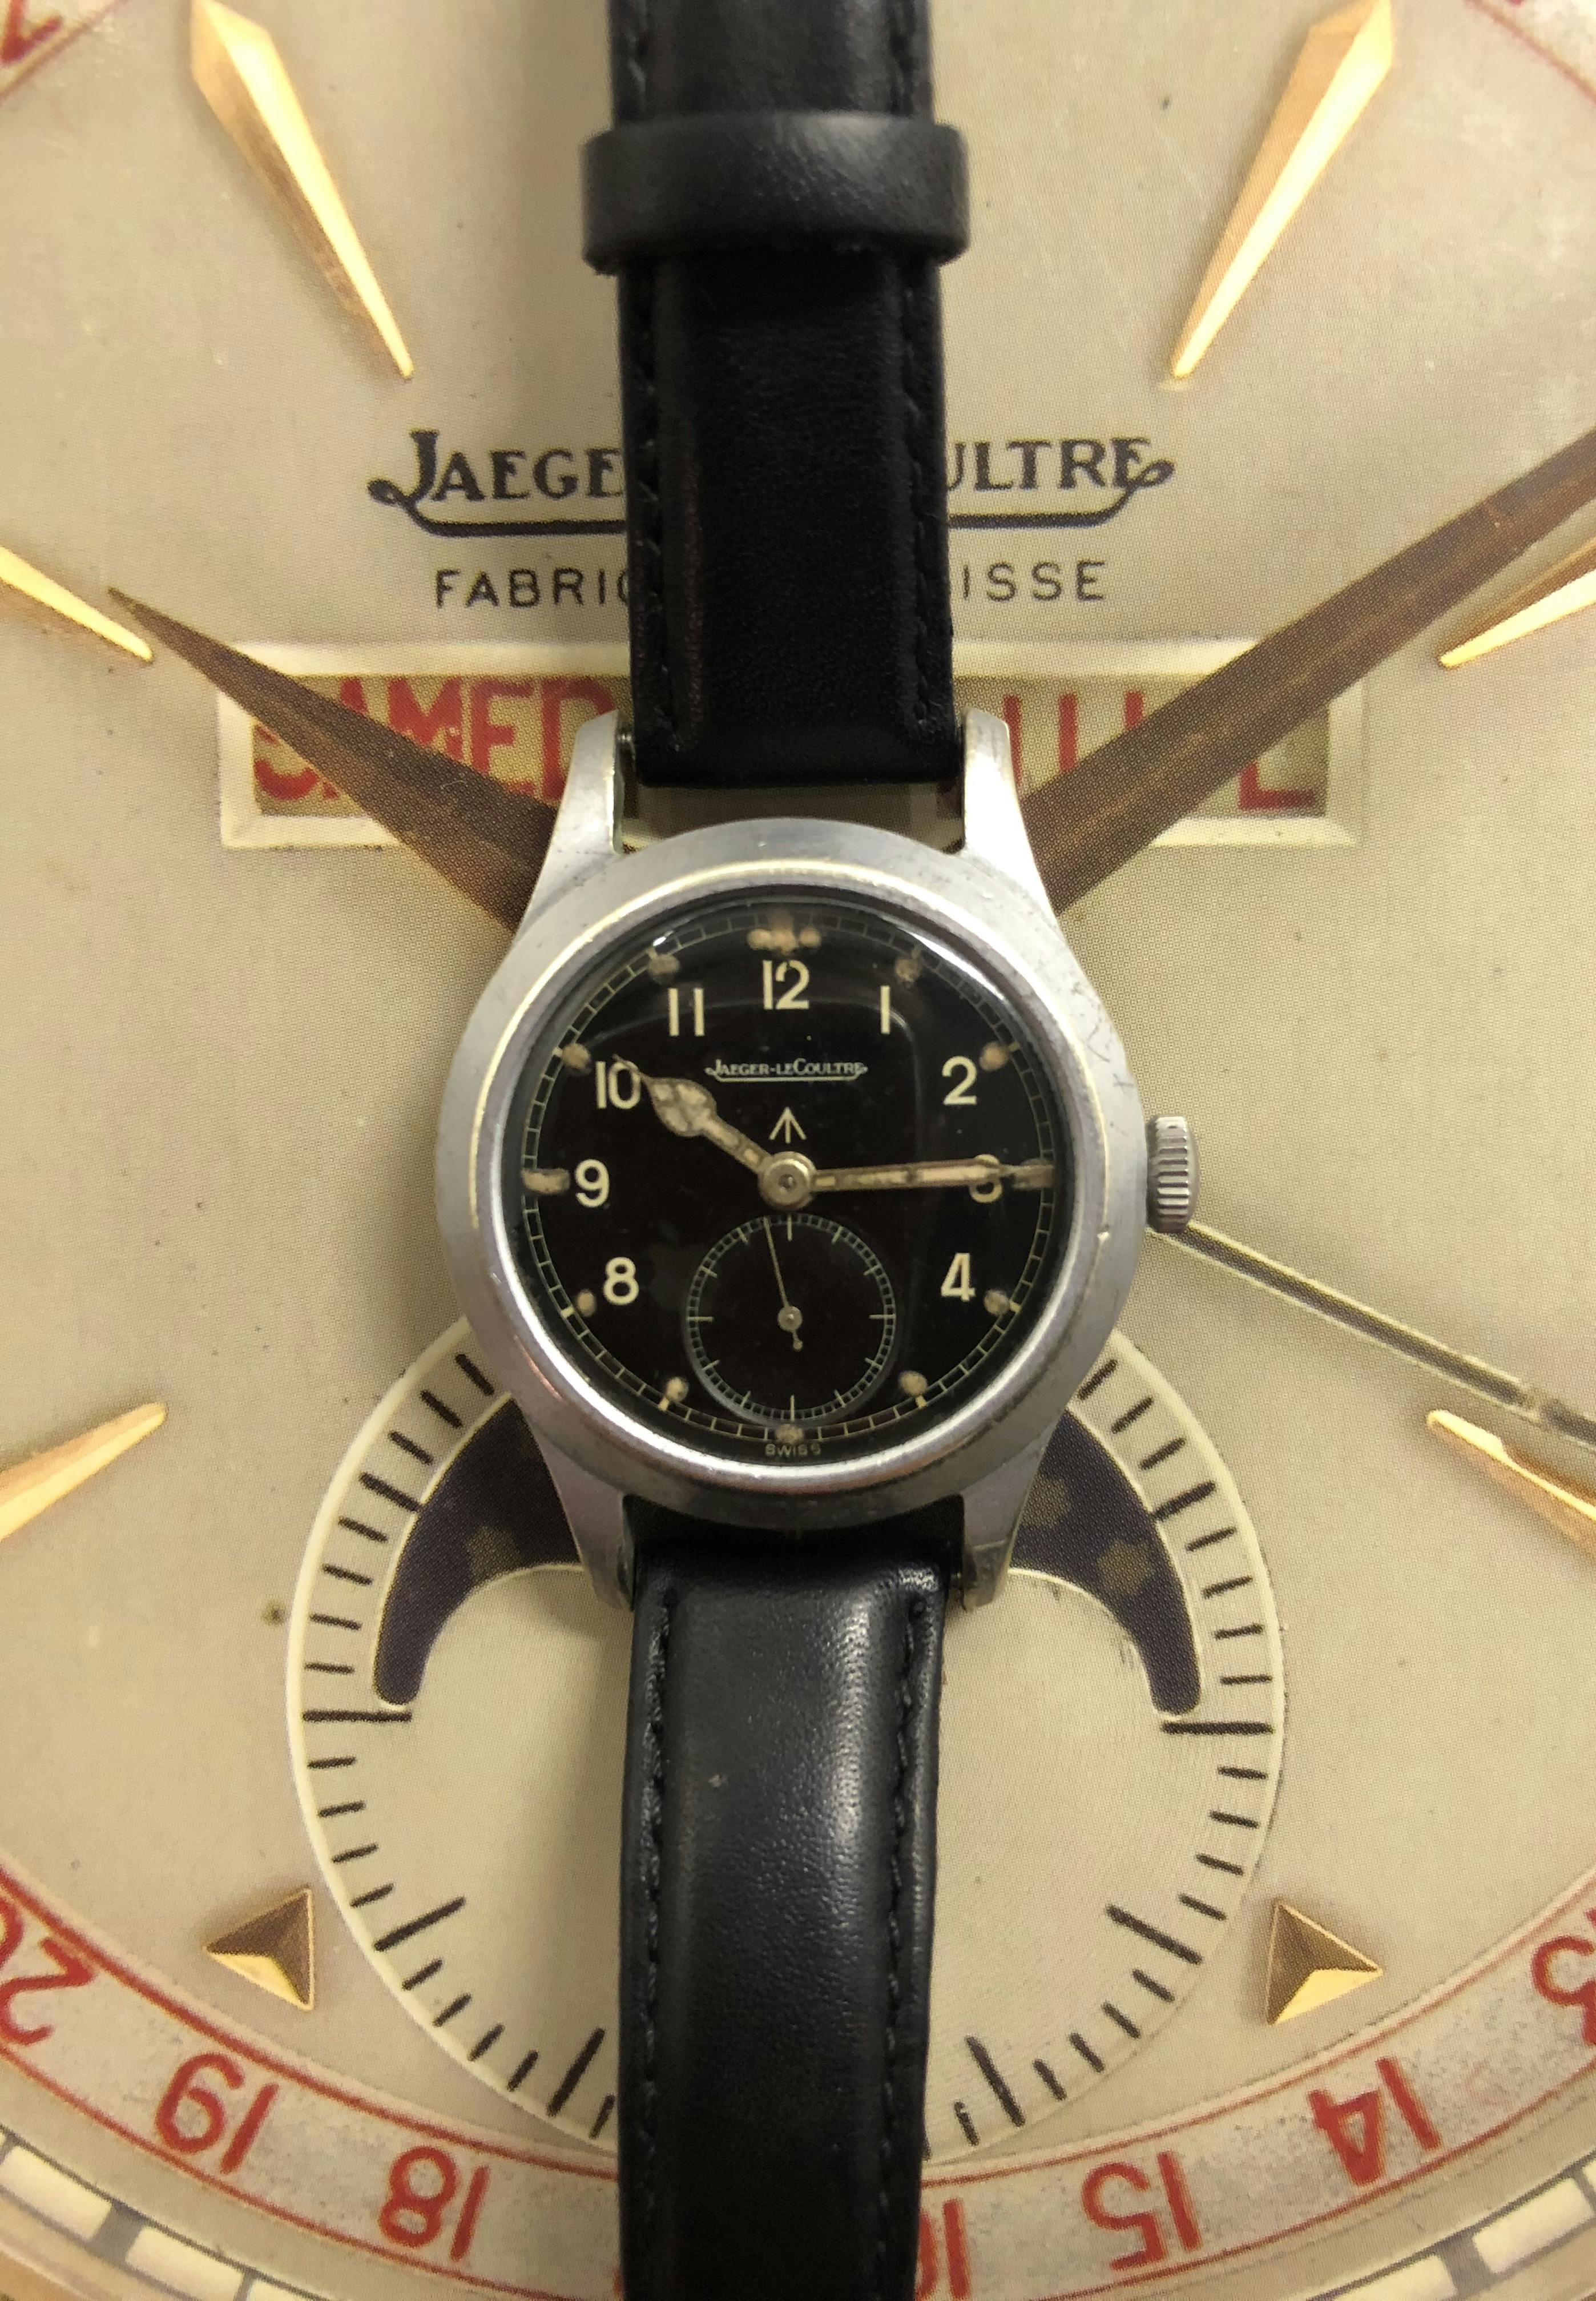 The CEO of the Watch Collectors' Club own WWII issued Watch, part of the so-called "Dirty Dozen". Manufactured by Jaeger LeCoultre